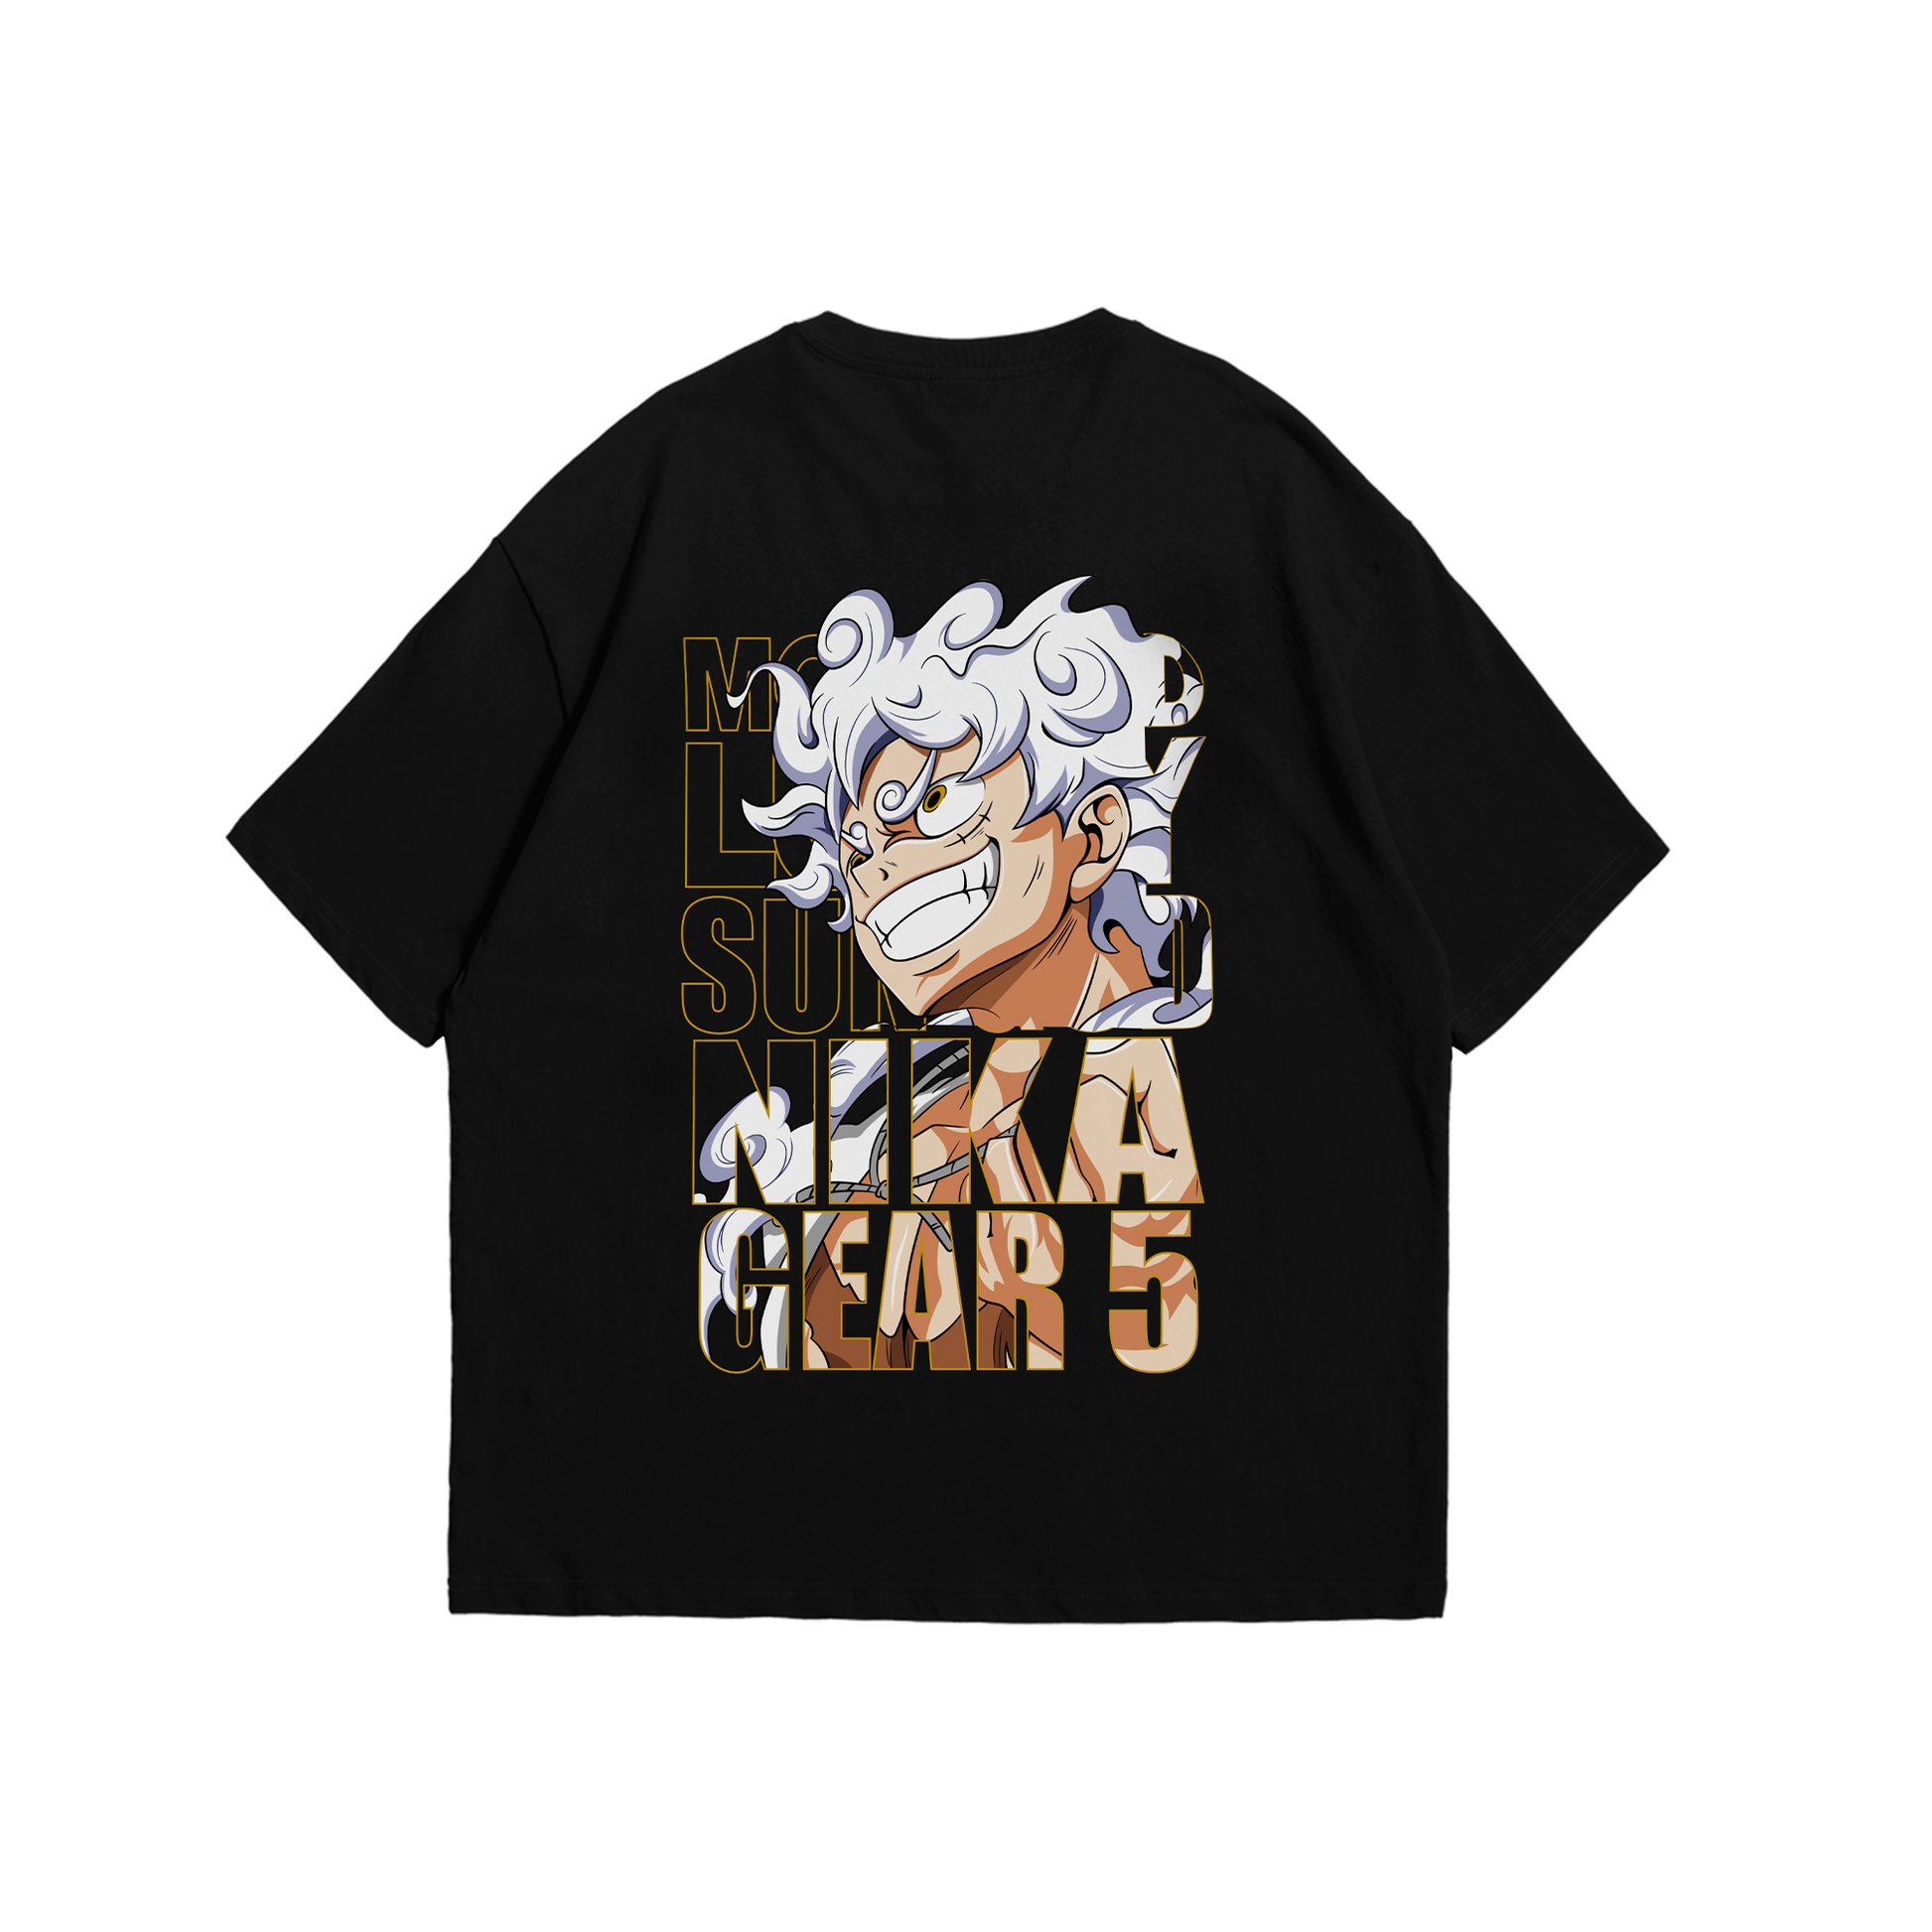 Gear 5 shirts Are available in the shop!🌩️ #gear5 #gear5luffy  #animestickers #animeshop #animestickercentral